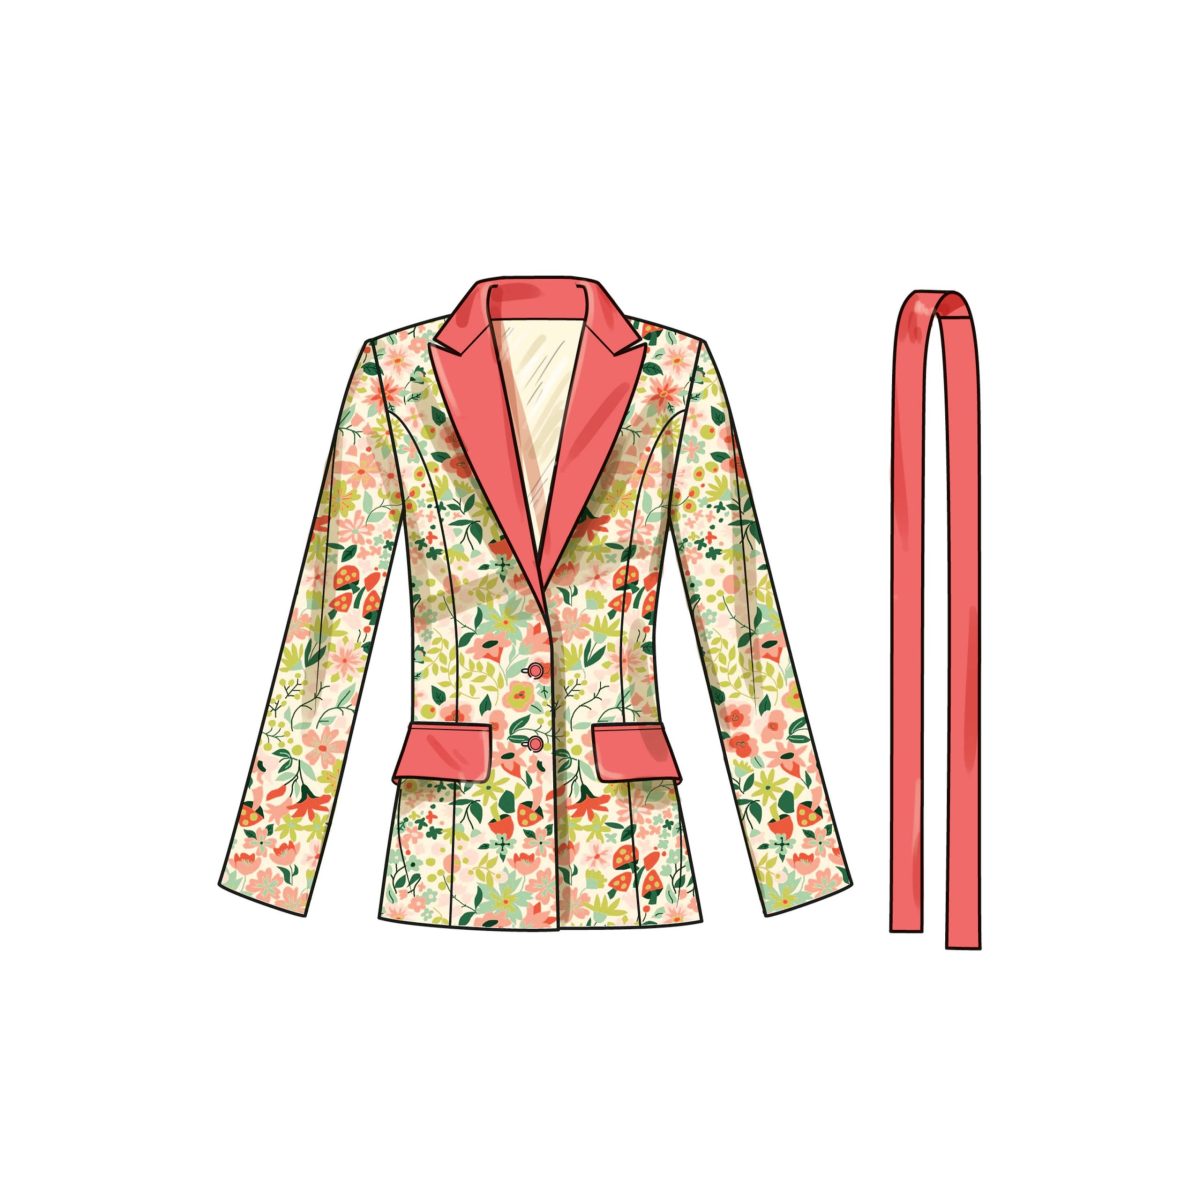 Simplicity Sewing Pattern S9688 Misses' and Women's Jacket with Tie Belt